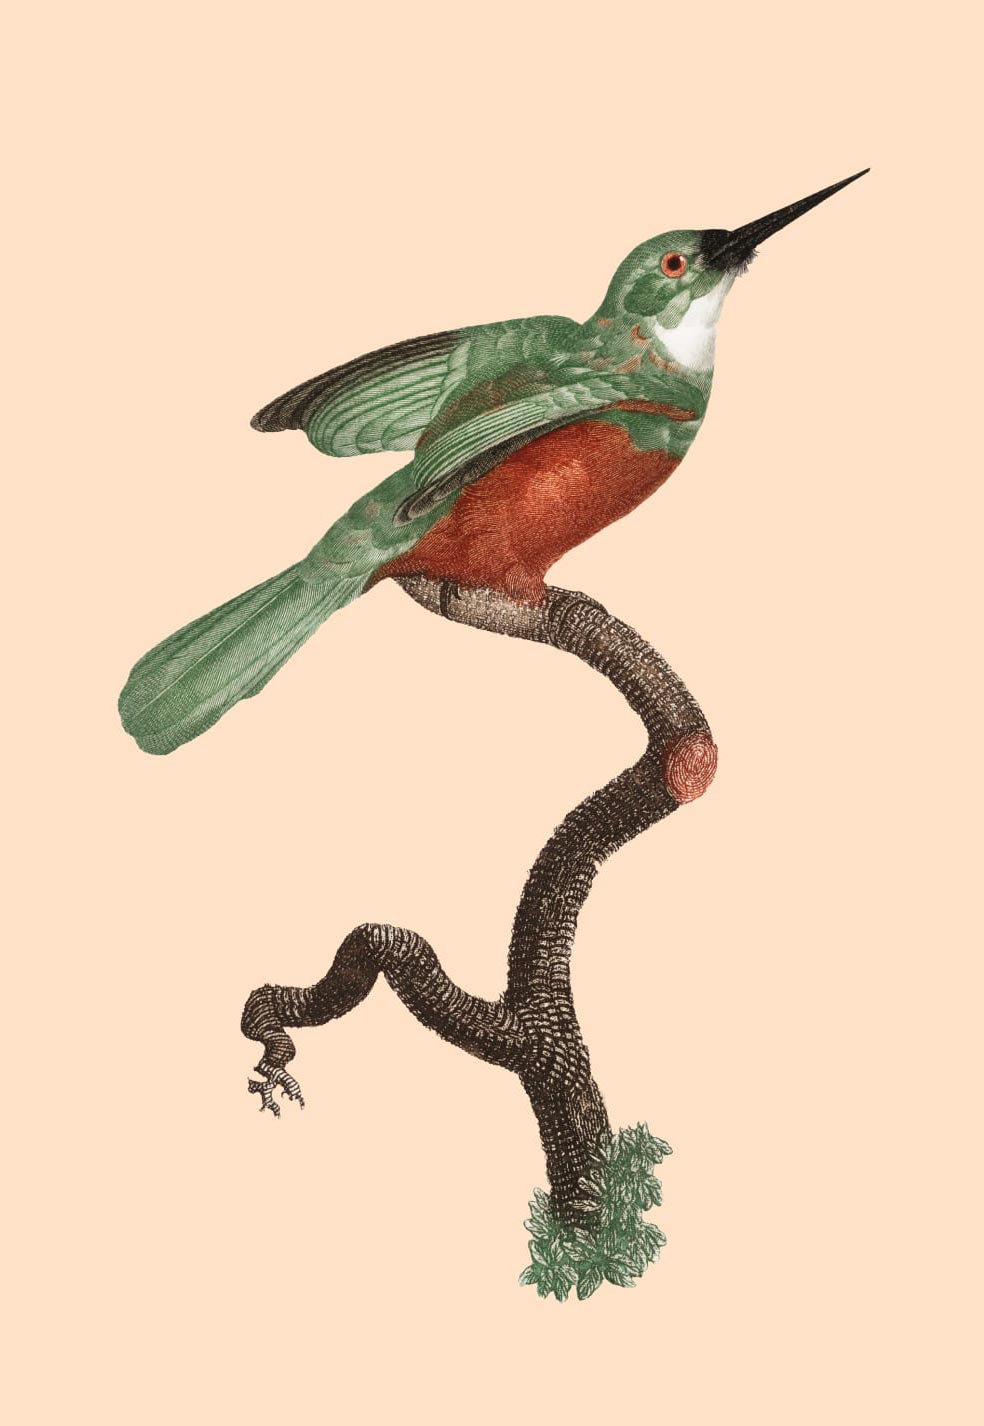 Illustration of a bird sitting on a branch.